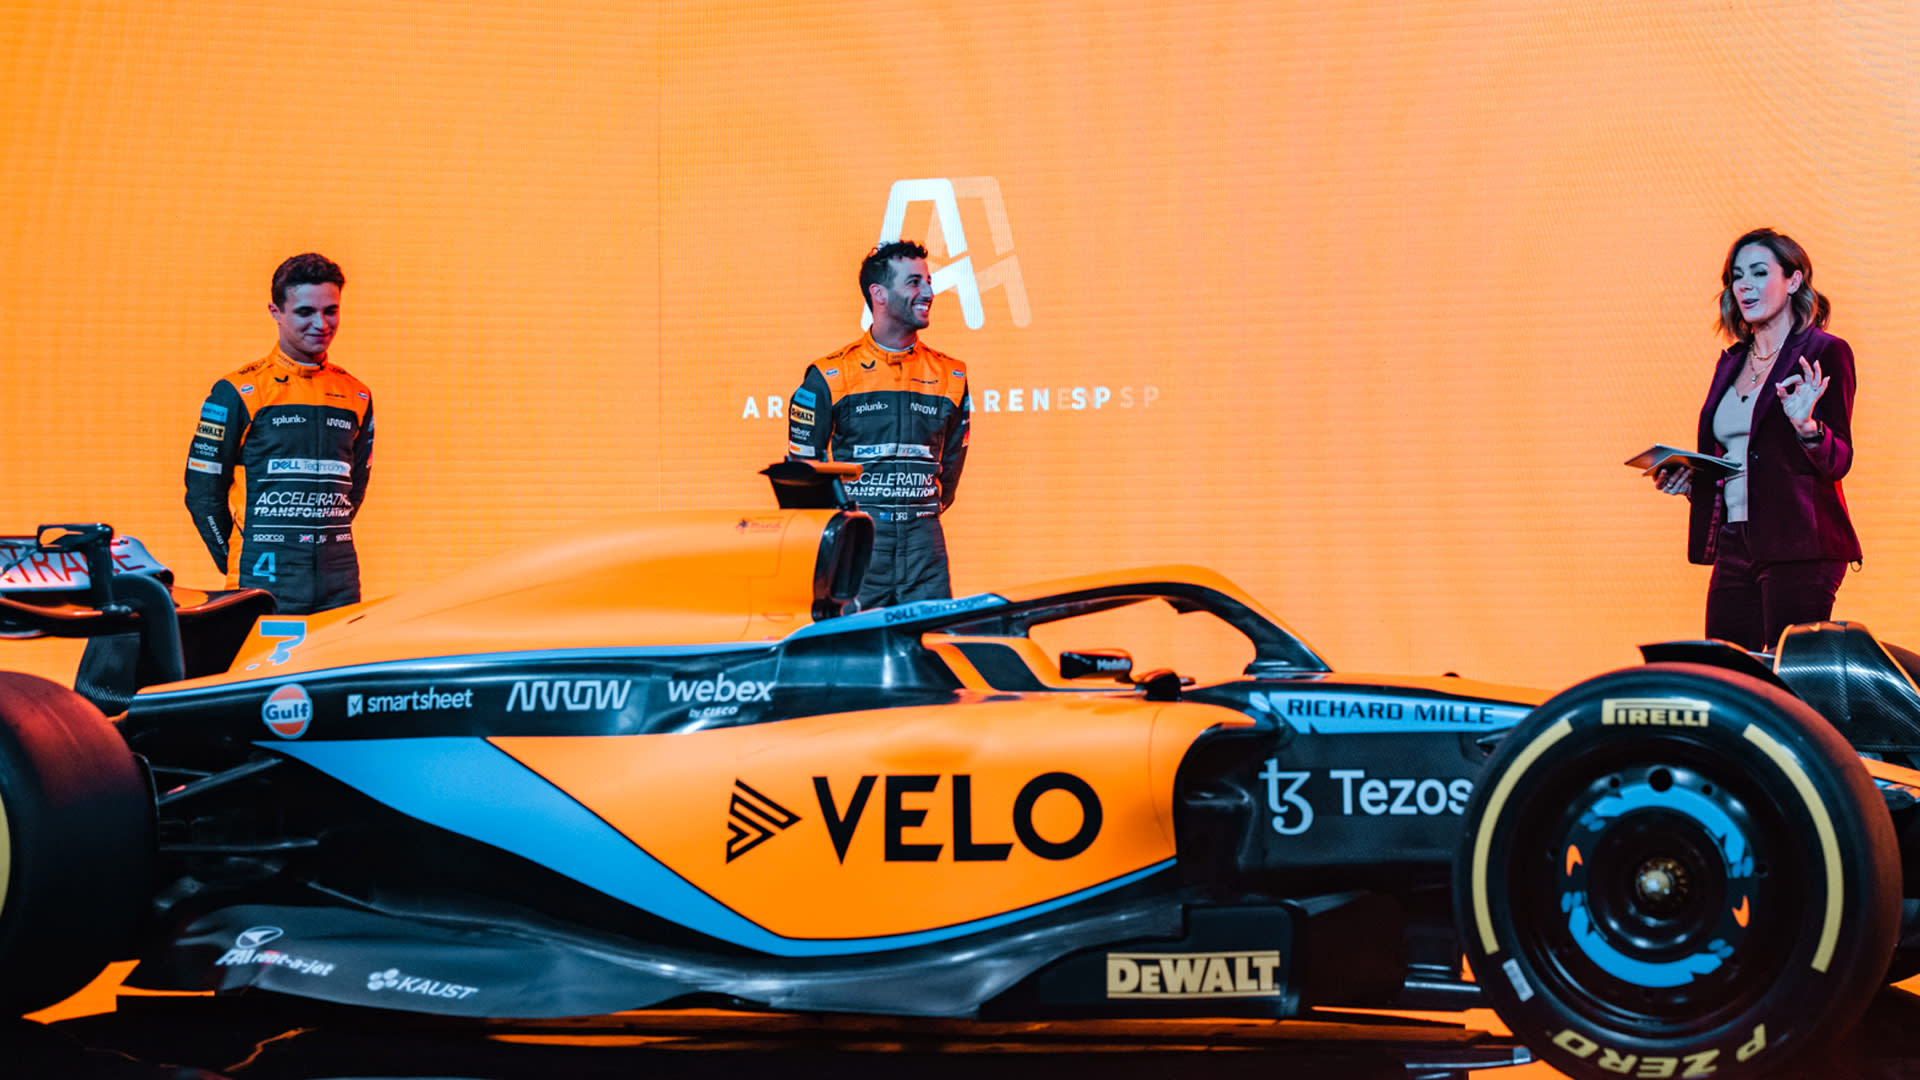 Gallery: McLaren Shows First Images of MCL36 for 2022 F1 Season